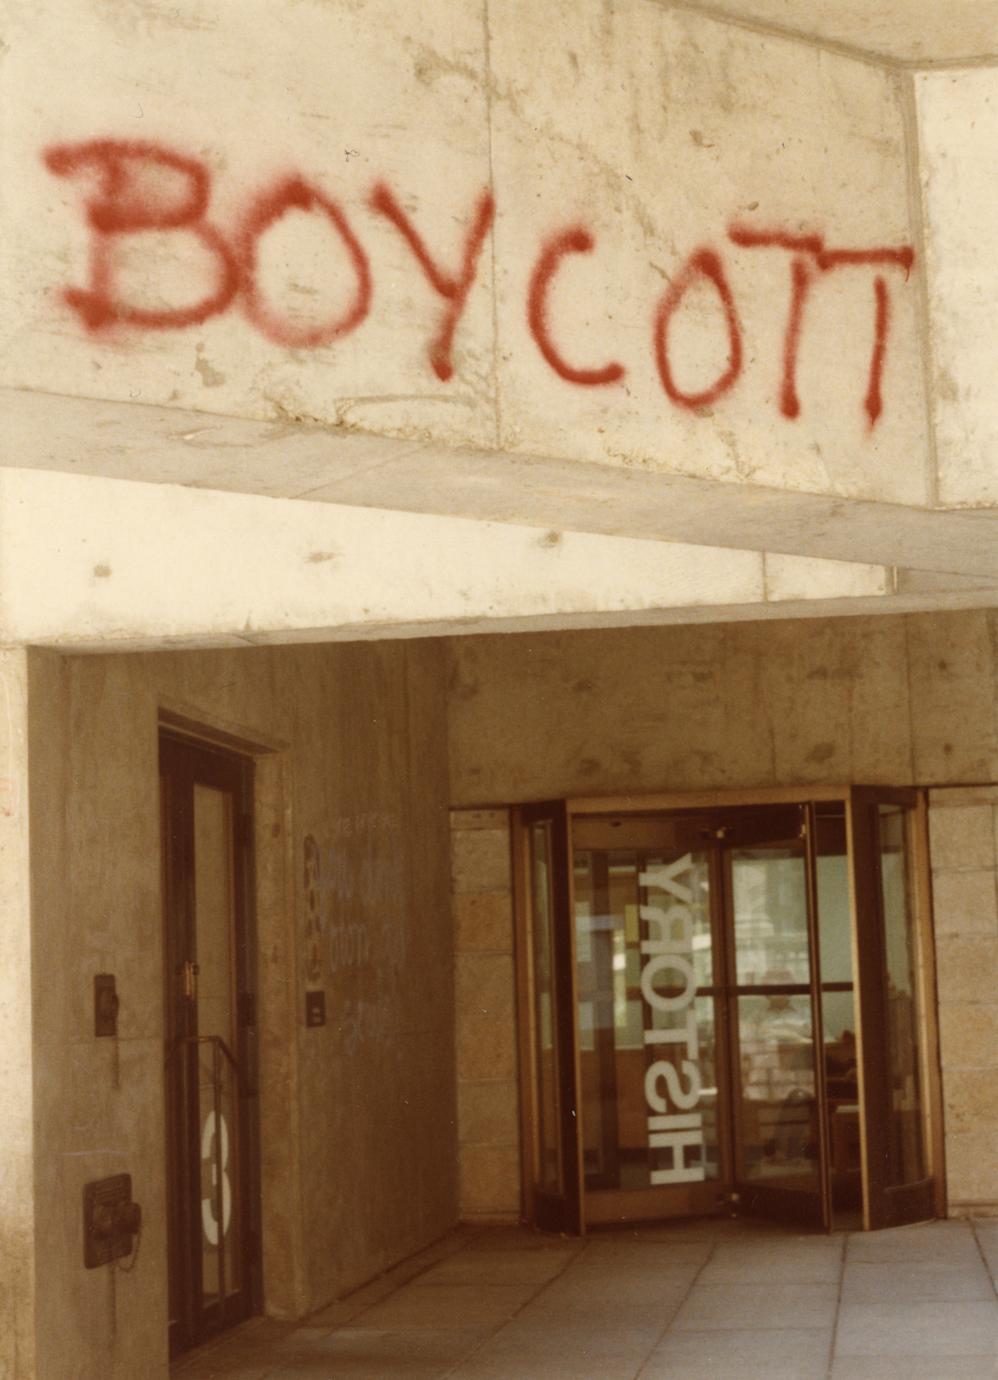 "Boycott" graffiti in front of History Department entrance